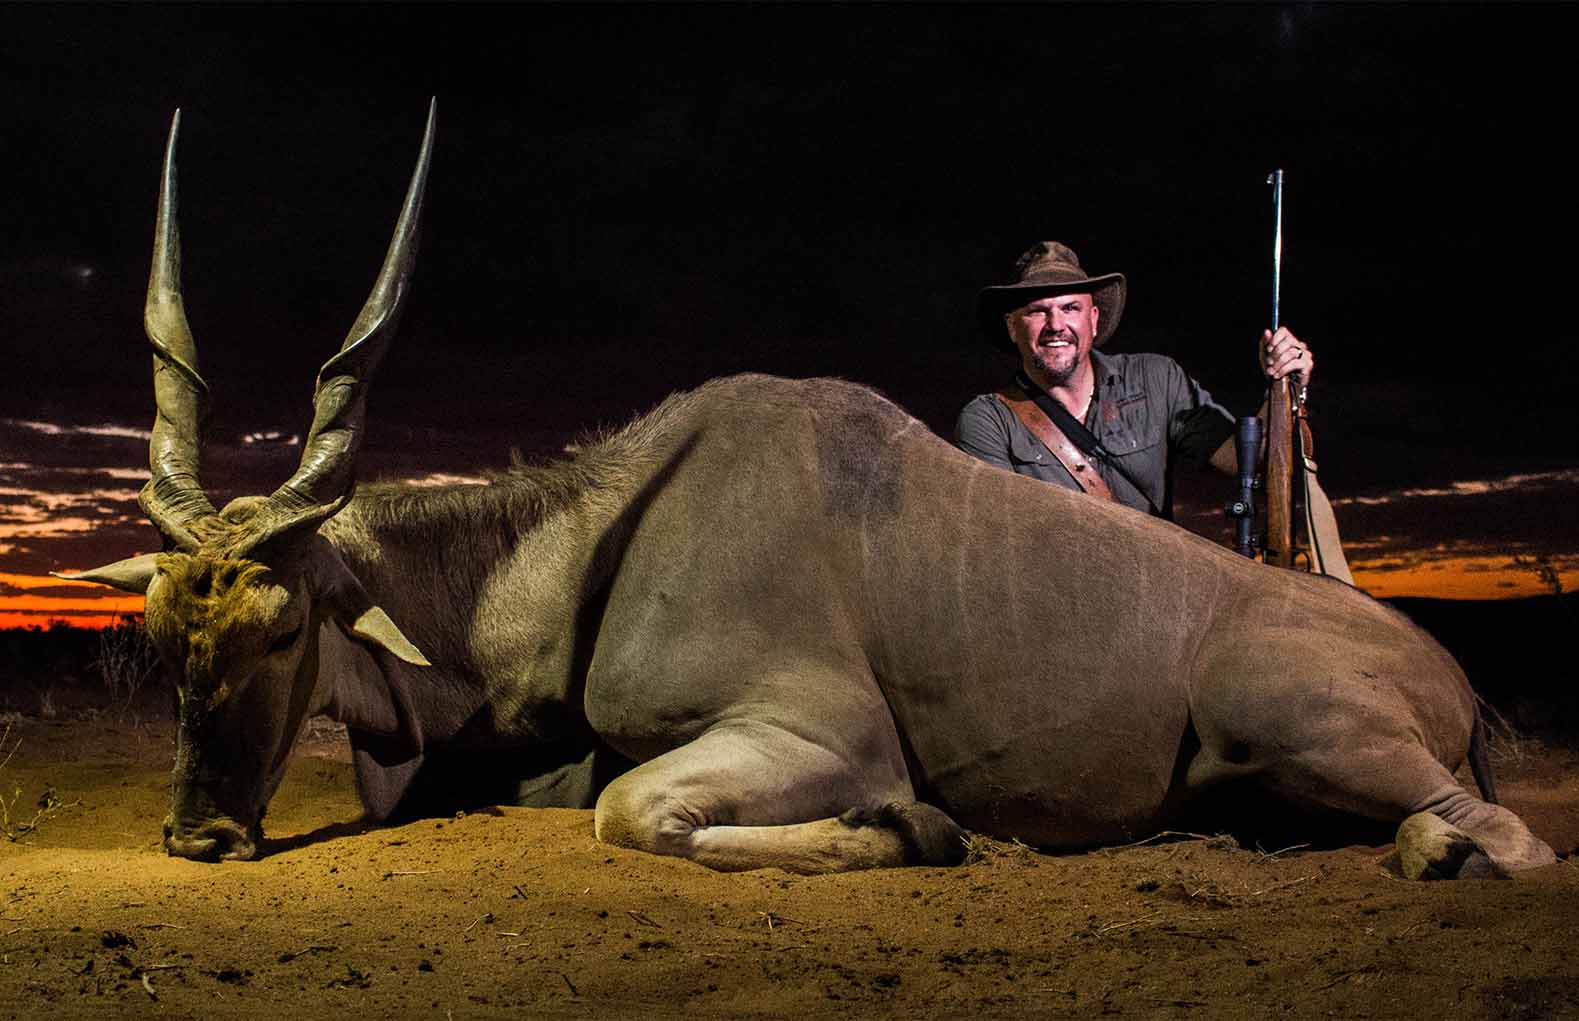 300 H&H Magnum On African Game